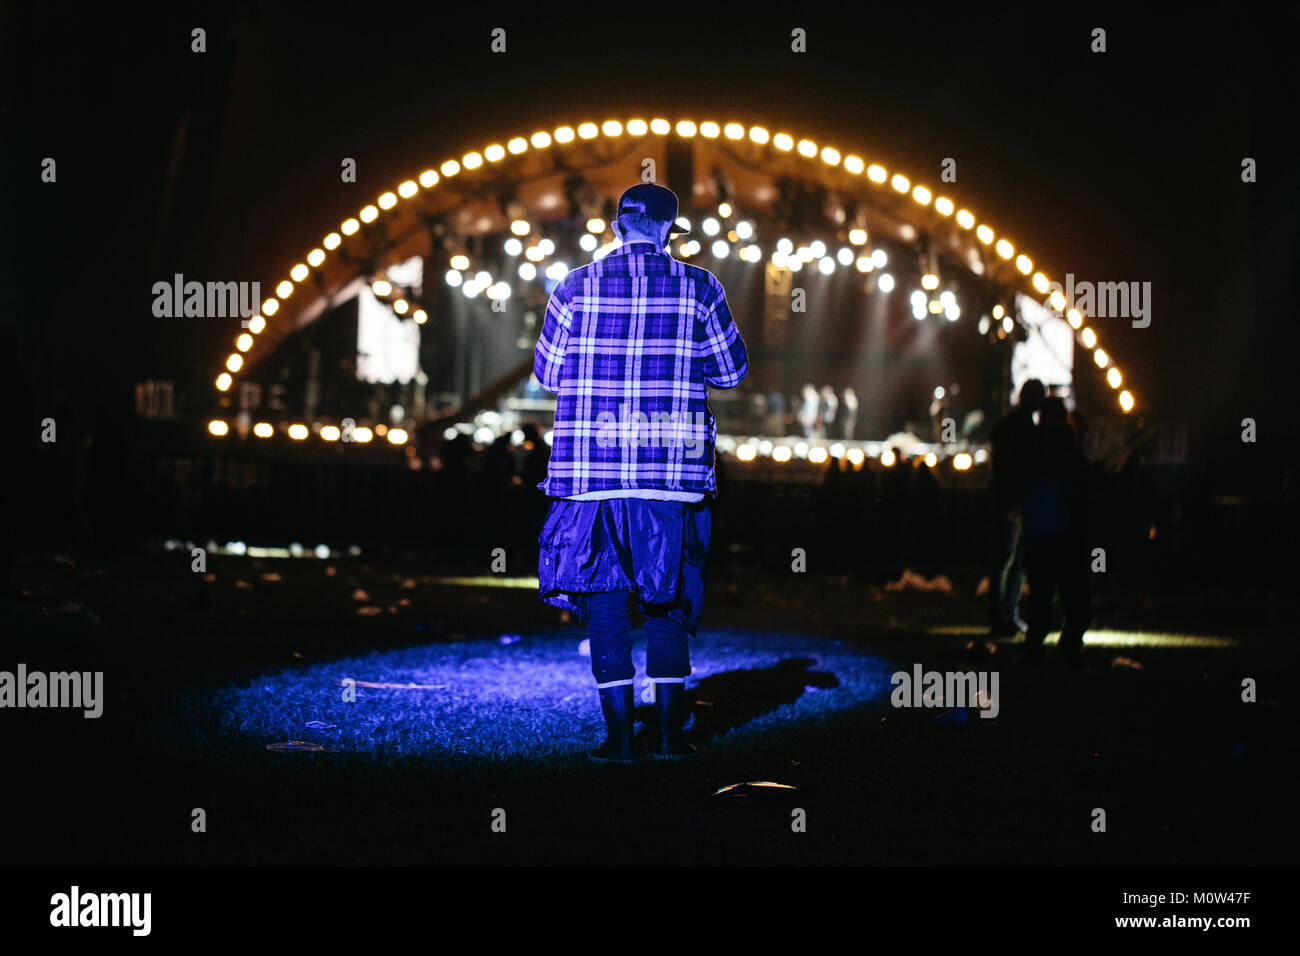 A lonely festivalgoer stands in the limelight in front of Orange Stage at the Danish music festival Roskilde Festival 2016. Denmark, 01/07 2016. Stock Photo